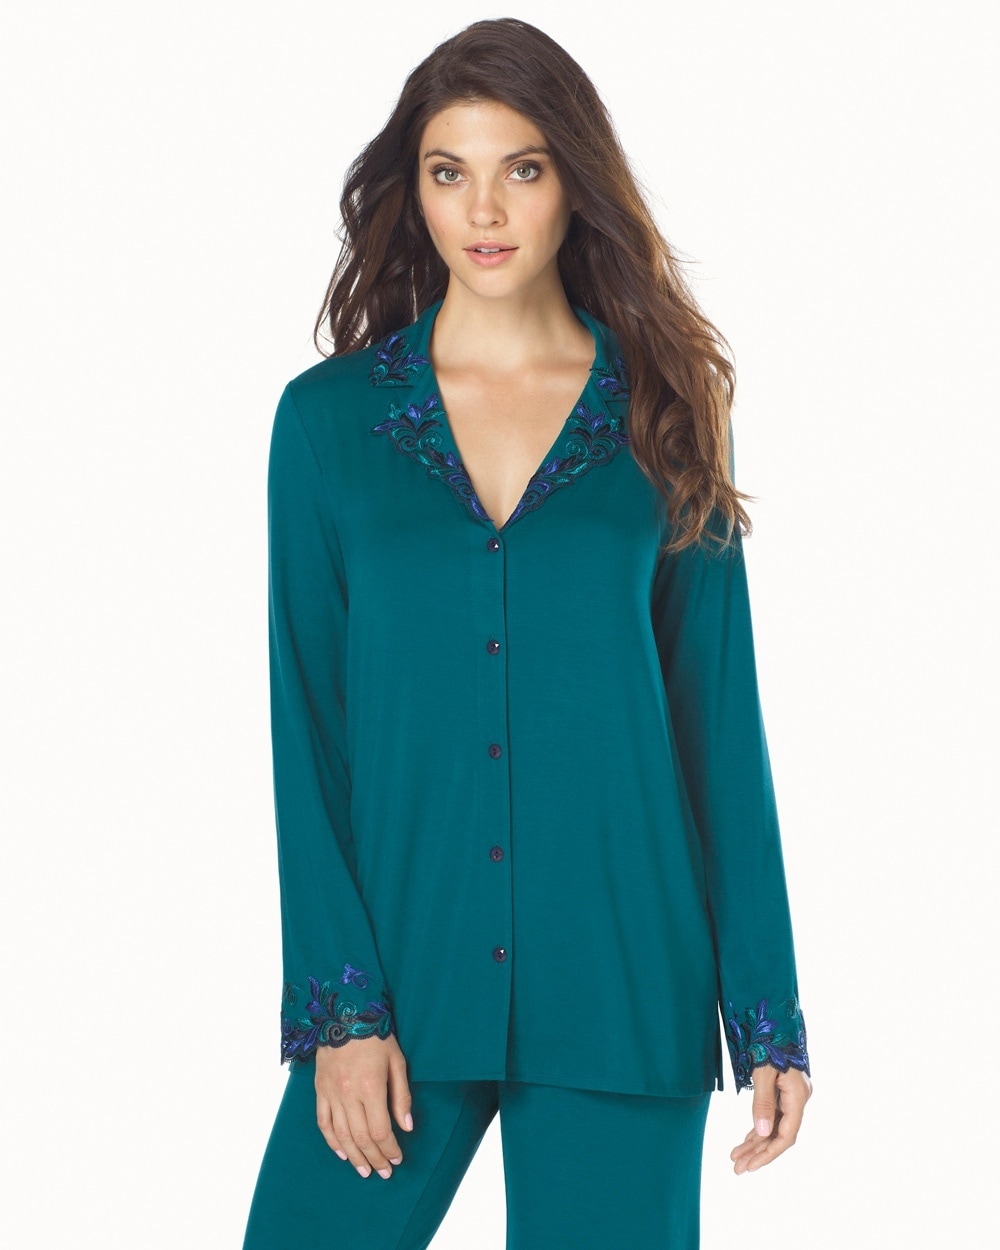 Limited Edition Cool Nights Sensuous Lace Notch Collar Pajama Top Gem Green With Jewel Blue